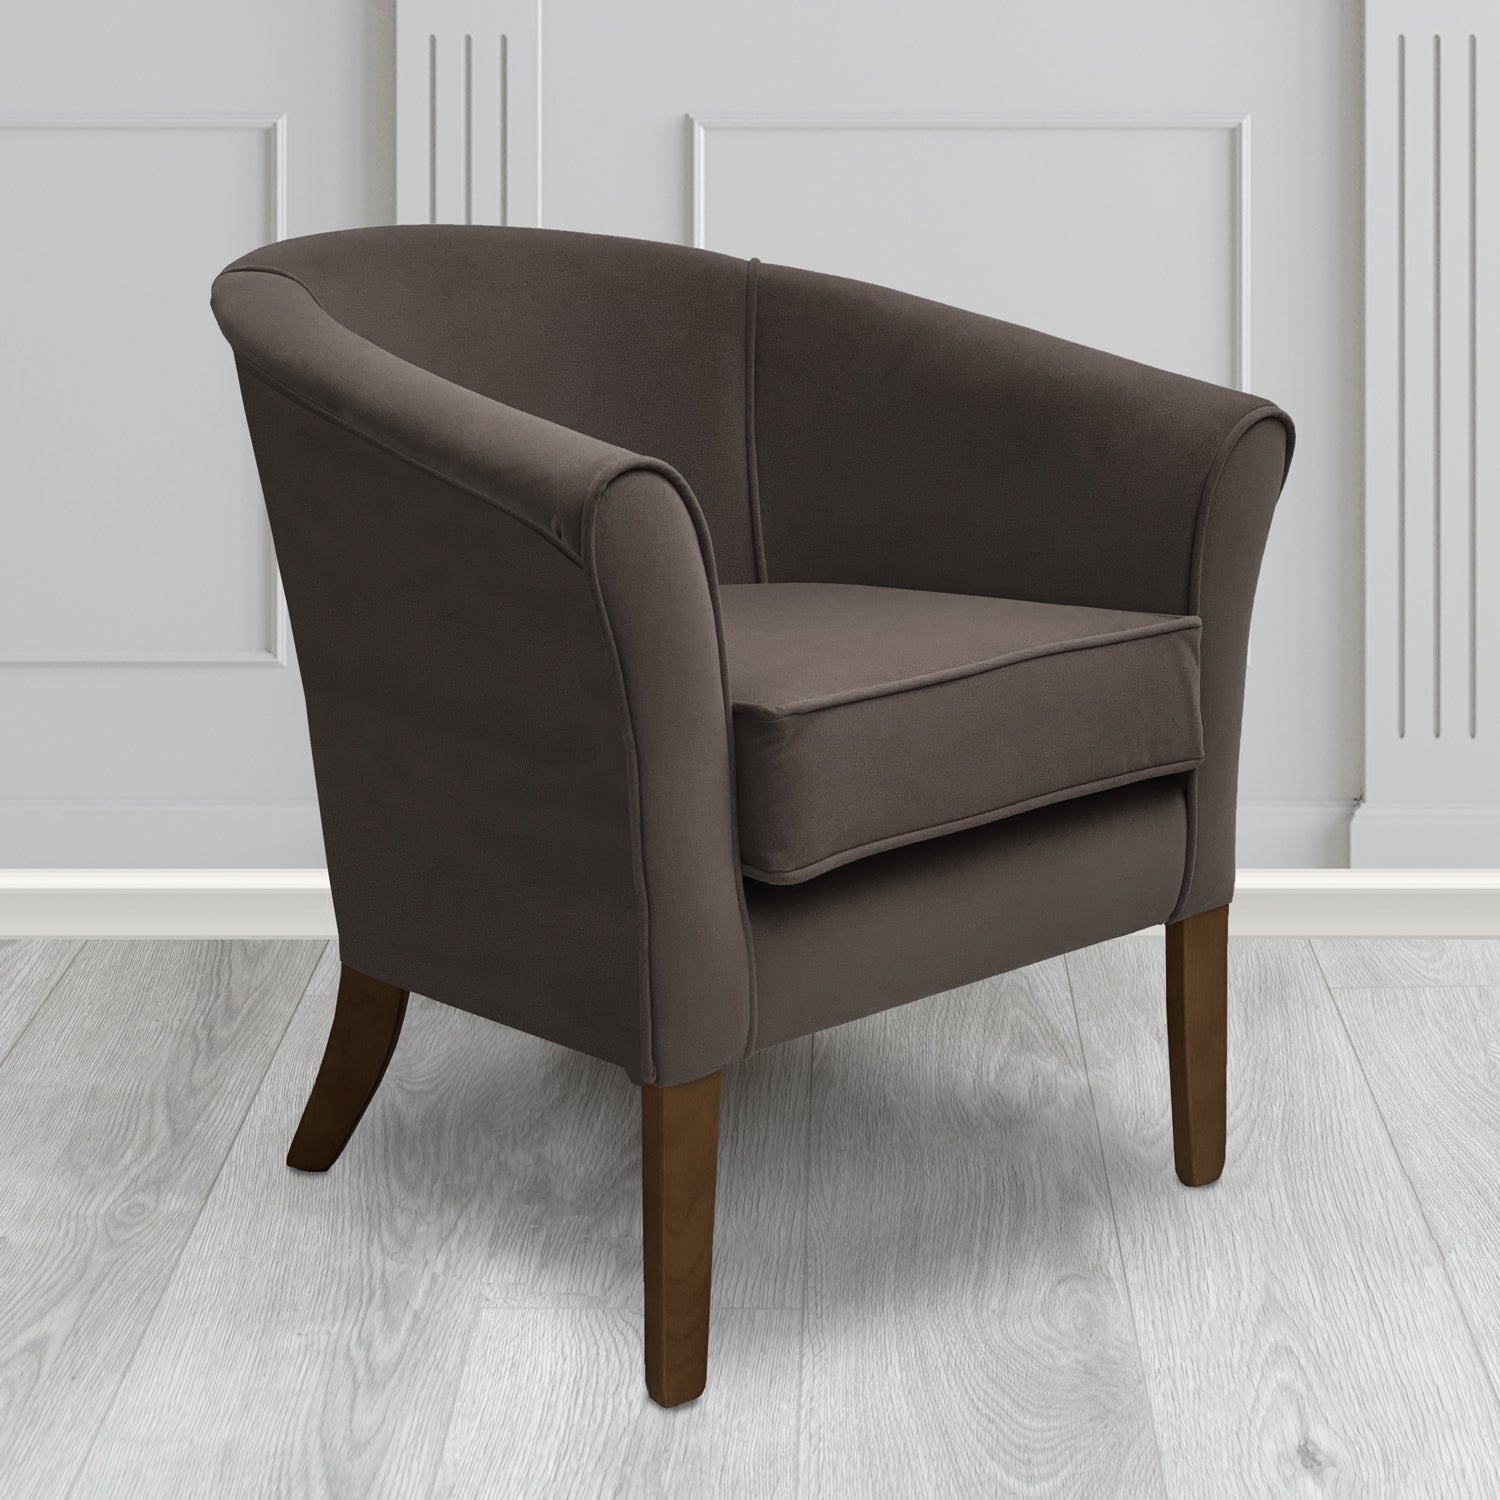 Aspen Tub Chair in Noble 903 Charcoal Crib 5 Velvet Fabric - Water Resistant - The Tub Chair Shop